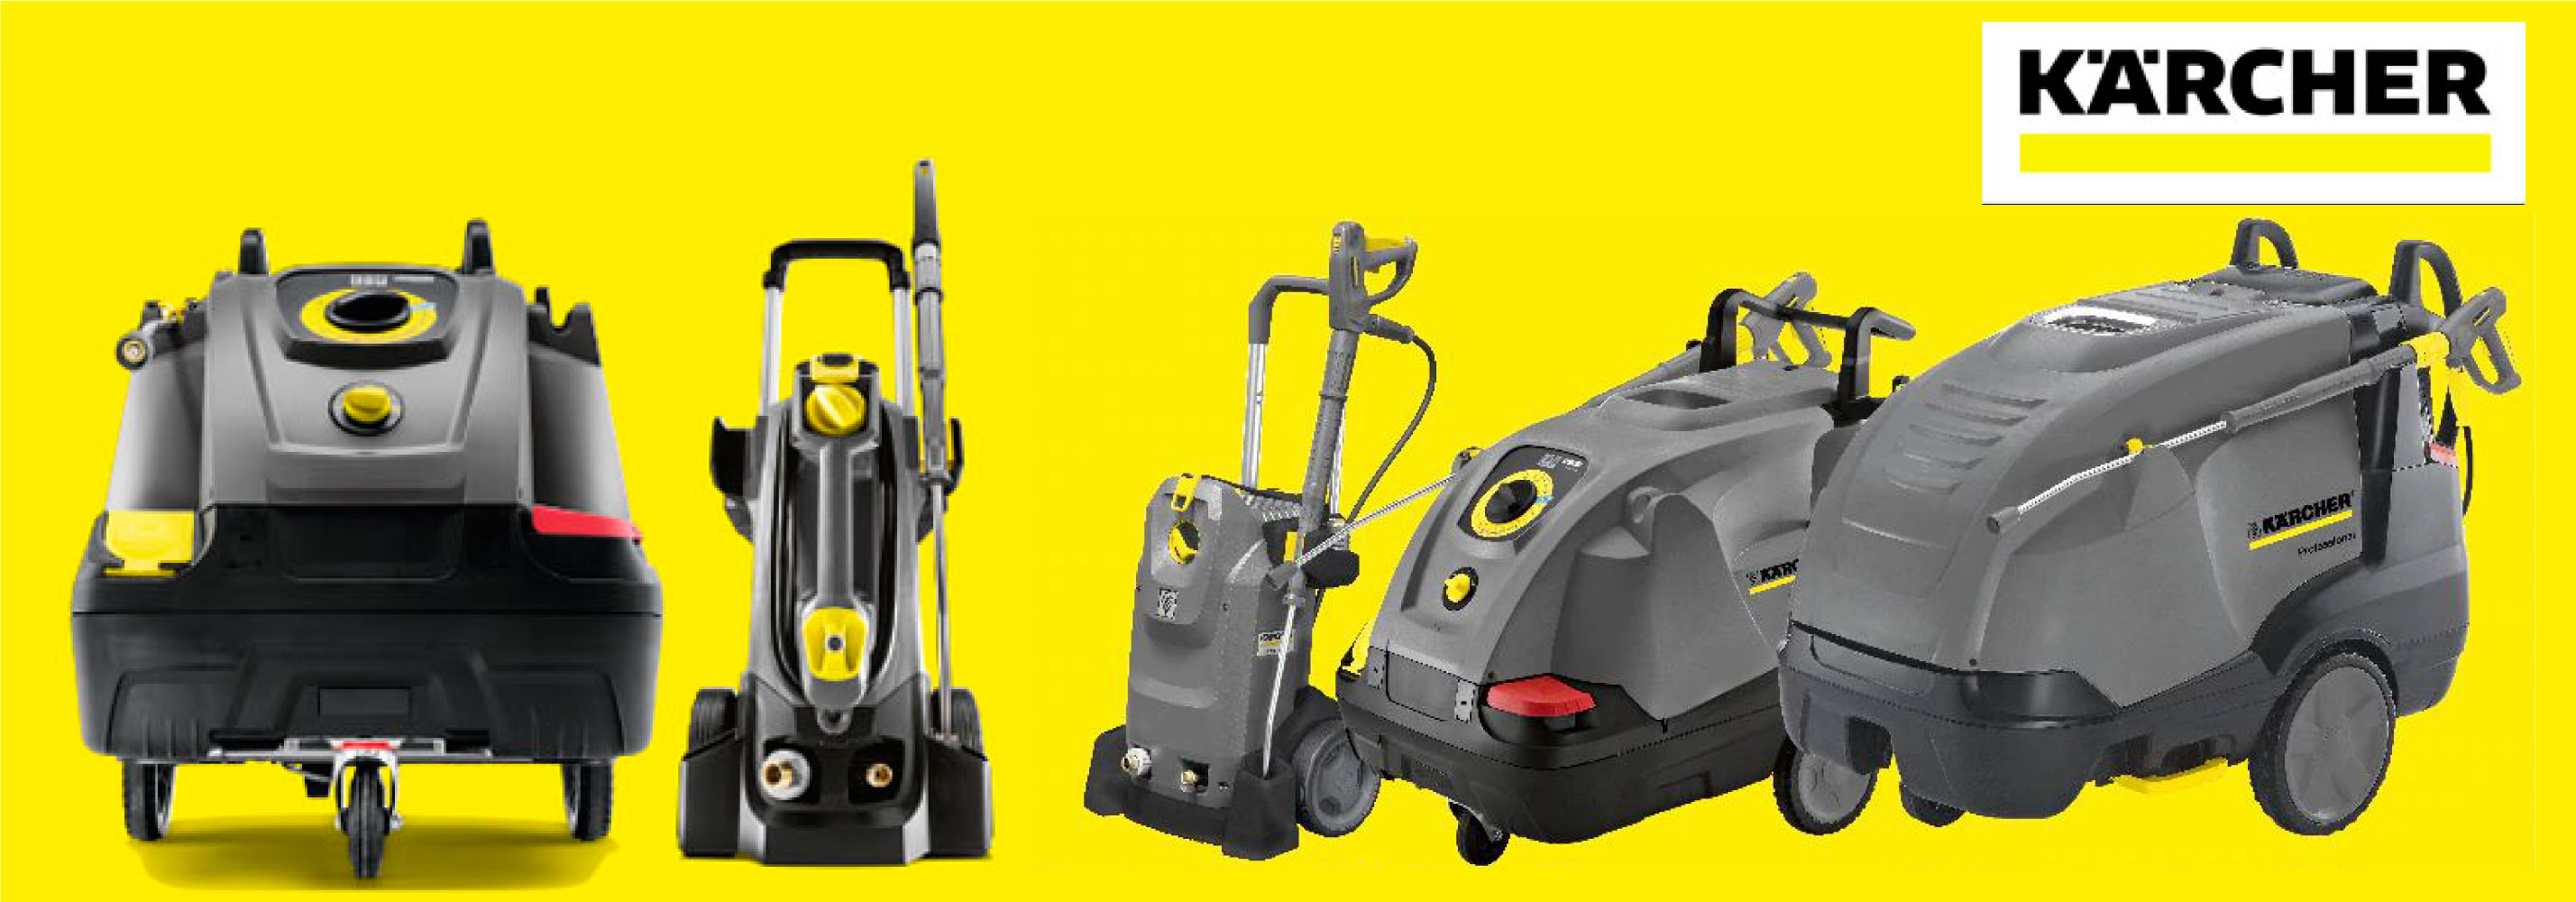 Hot Water High Pressure Cleaners